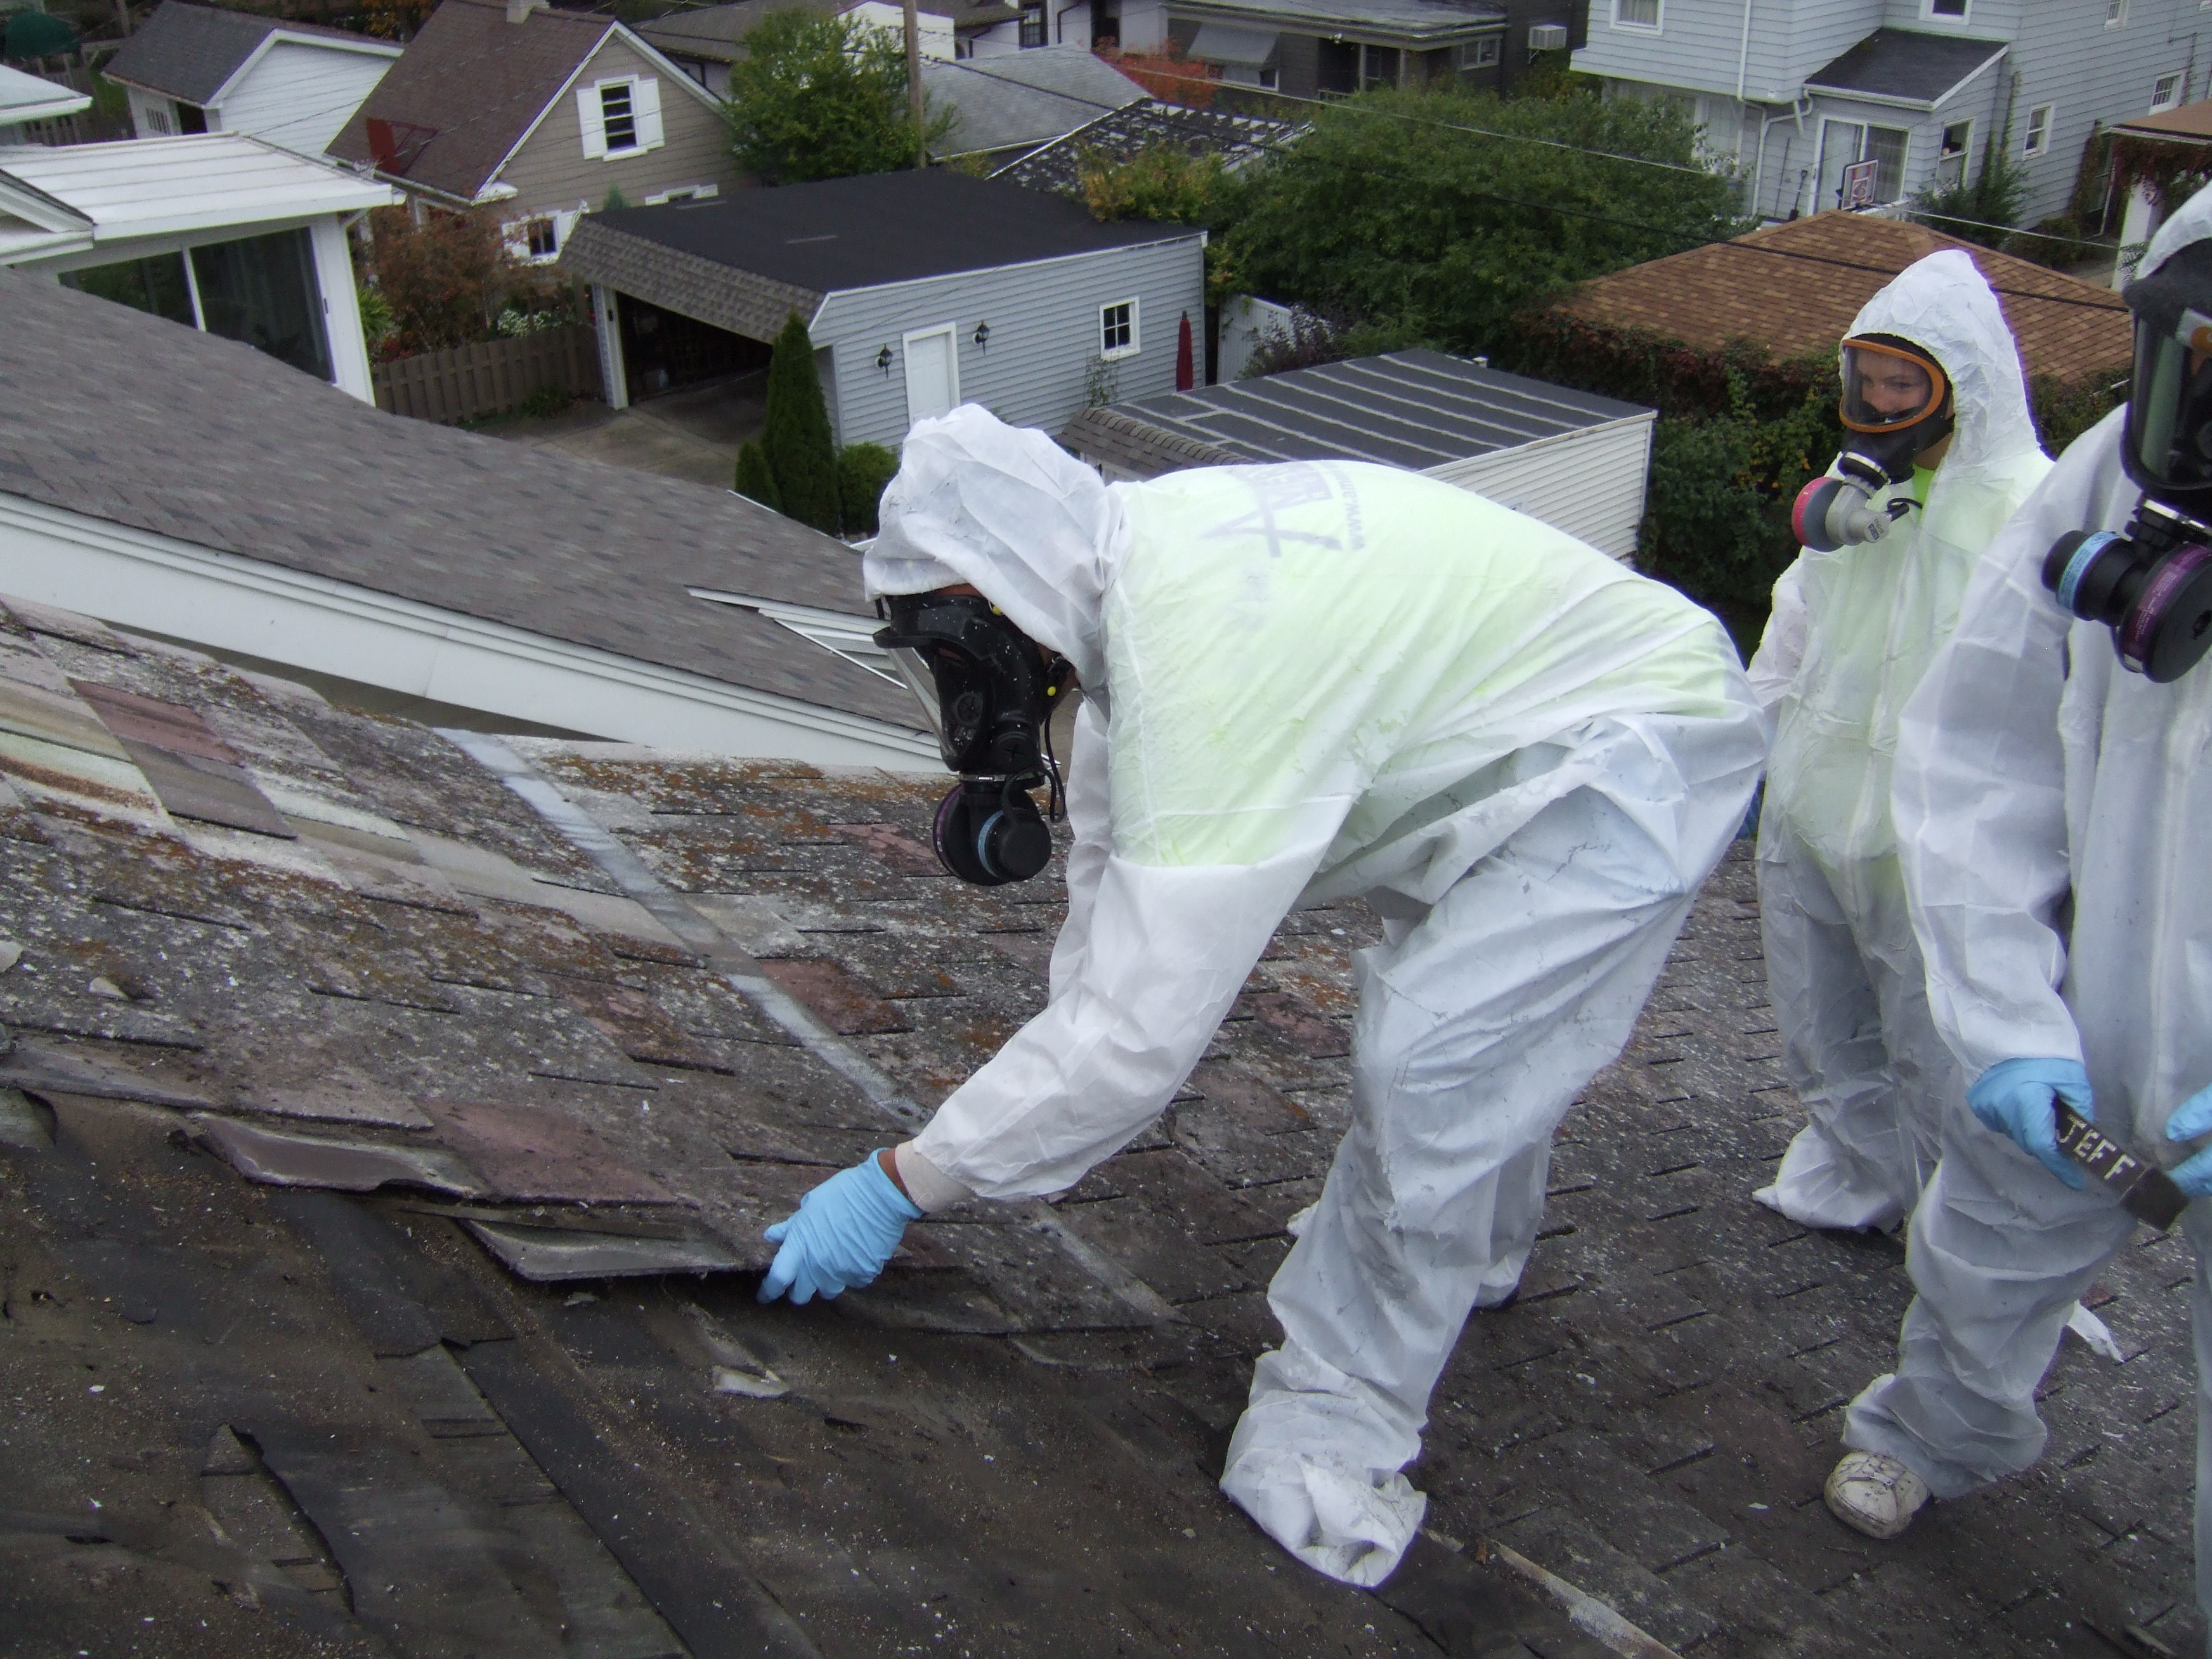 asbestos control surveys removal and management